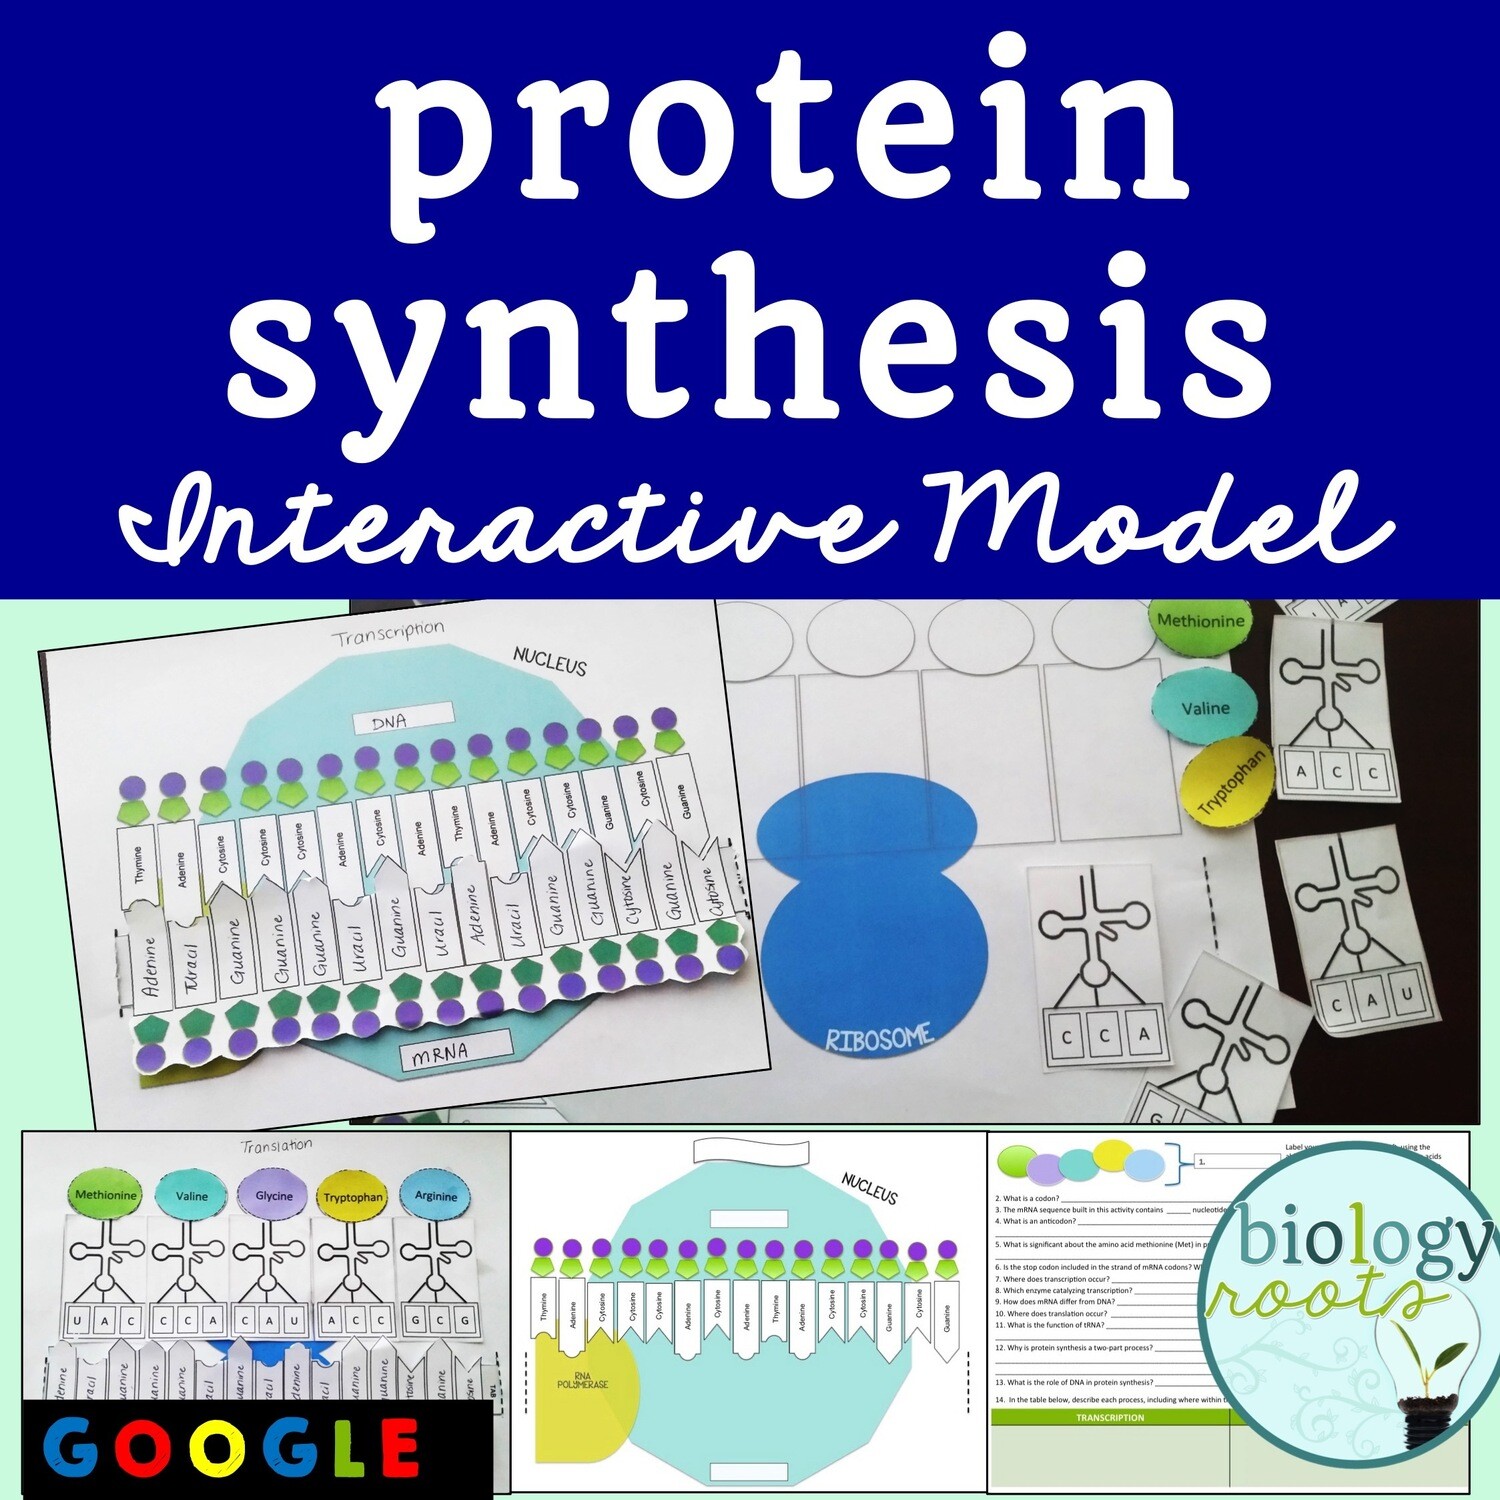 Protein Synthesis Model